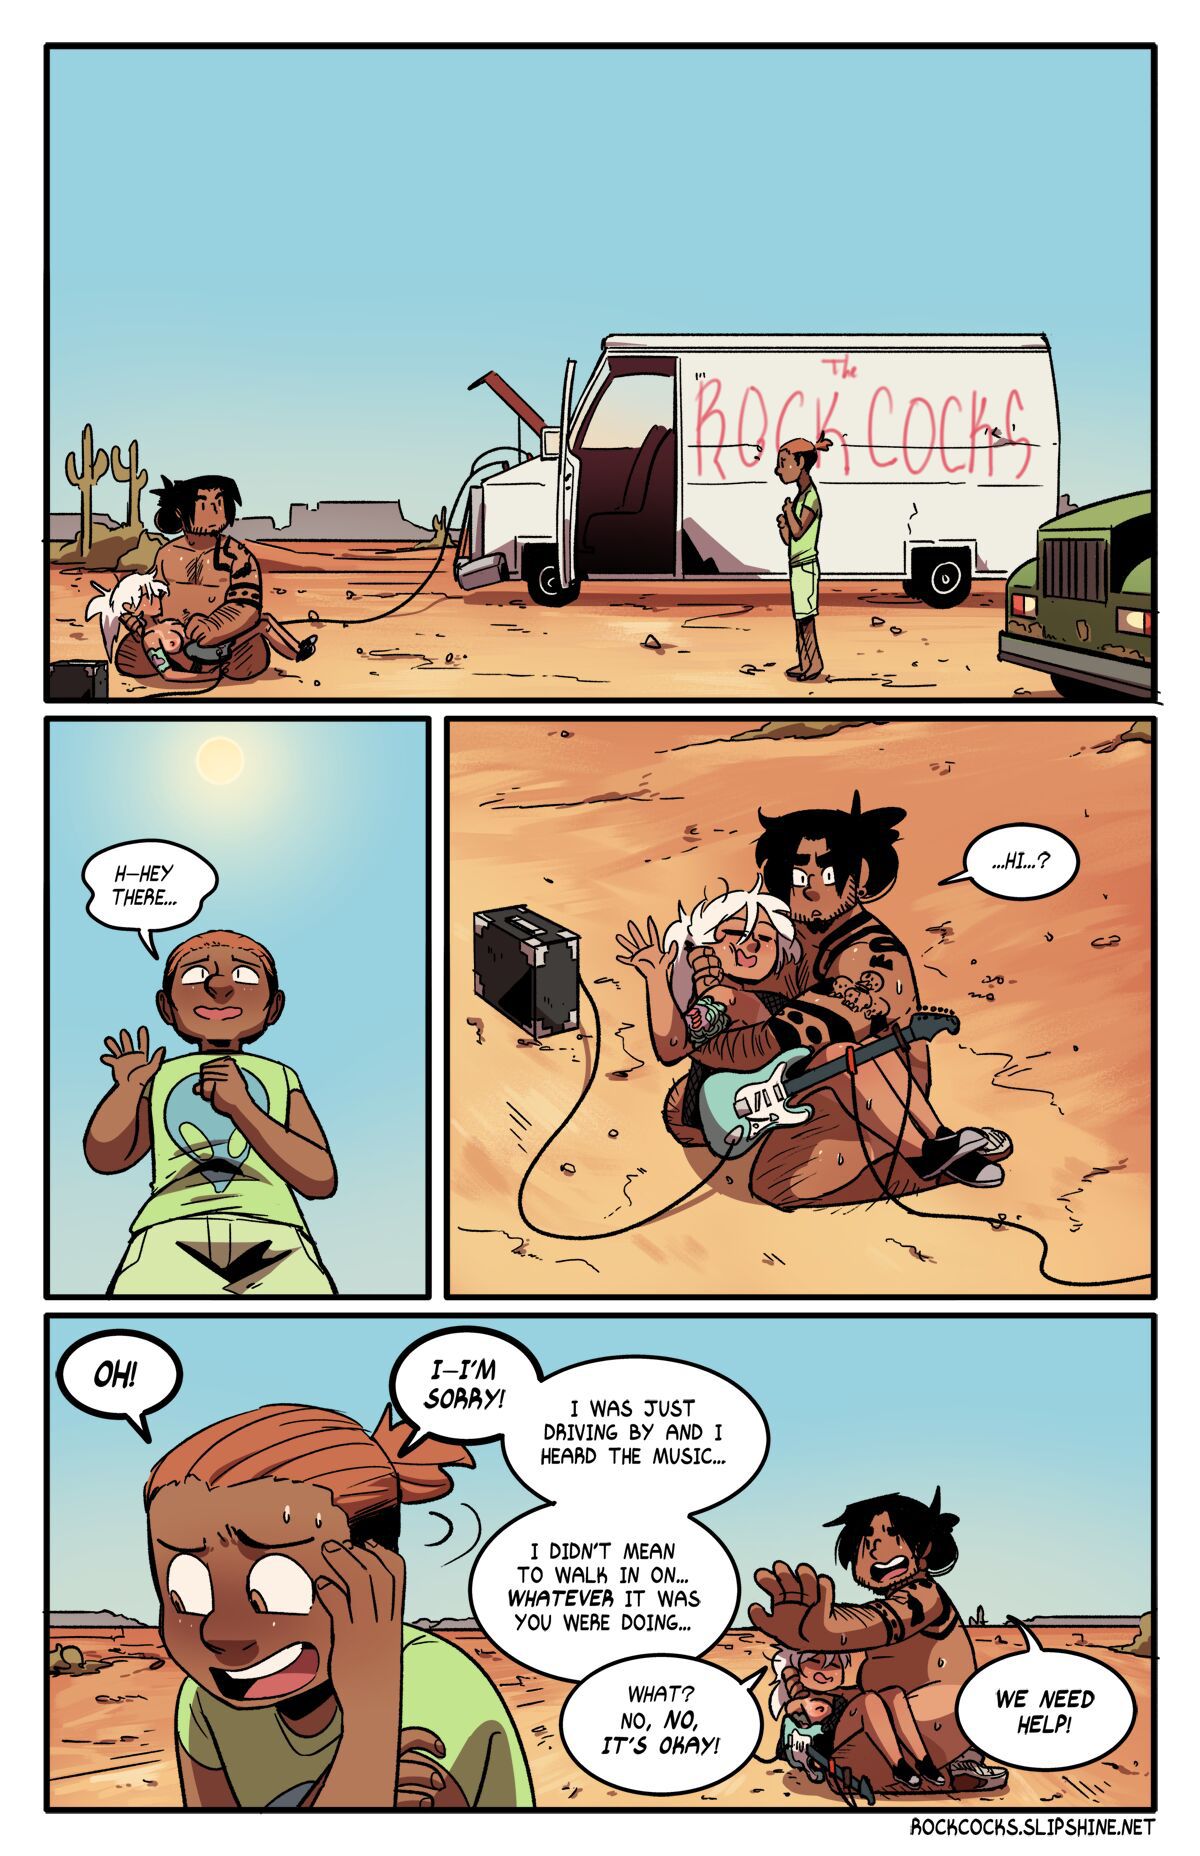 [Leslie Brown] The Rock Cocks ch. 1 - 14 [Ongoing] (HQ) 245